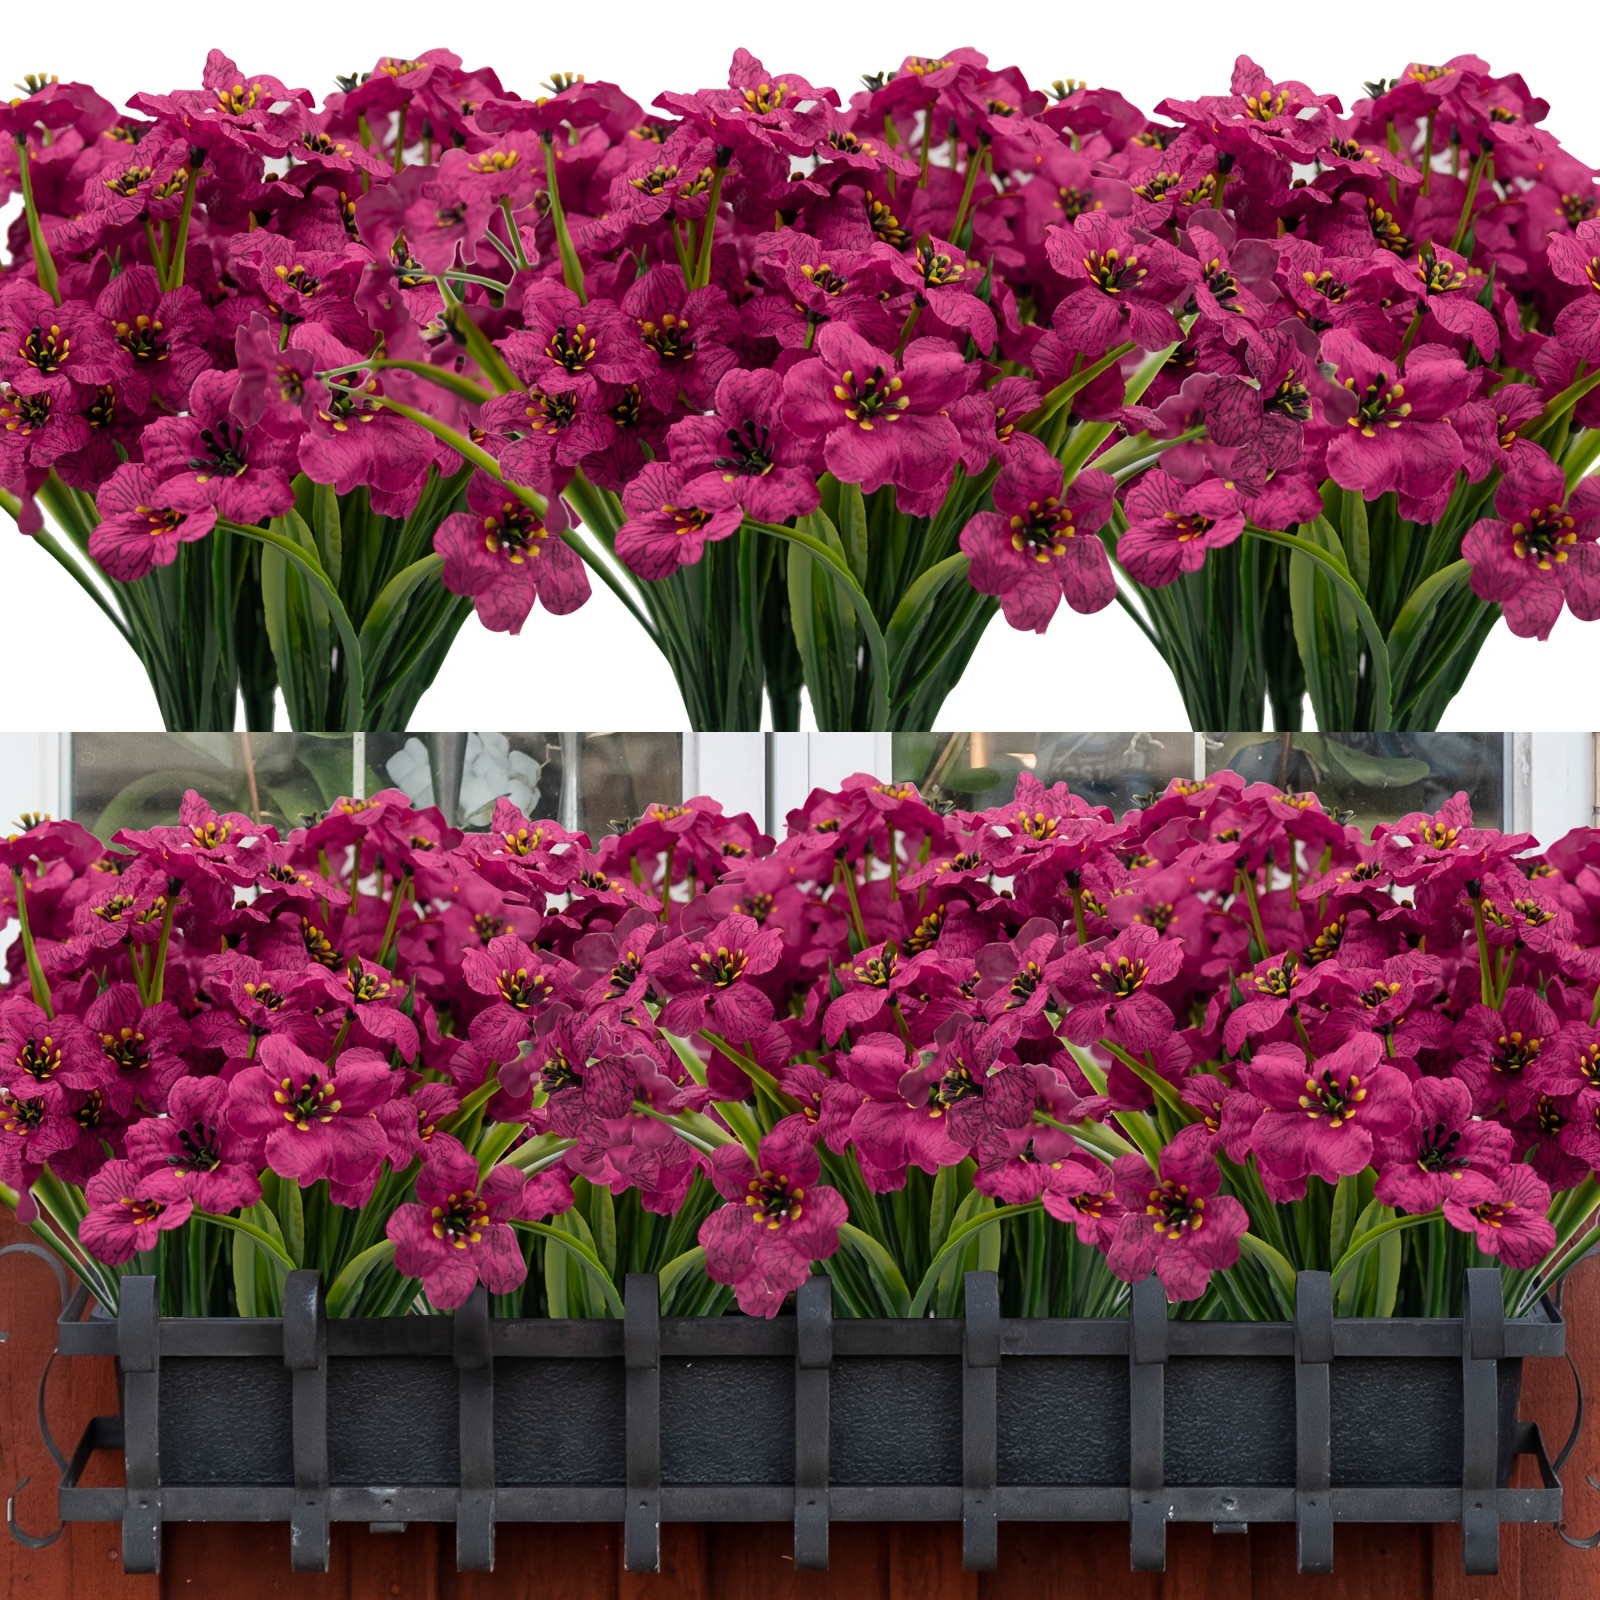 

22pcs Artificial Flowers, Outdoor Fake Flowers, Anti-uv Plastic Flowers, Outdoor Artificial Flowers, Window Boxes, Pink Garden Fake Plants, Front Porch Potted Plants, Home Decoration